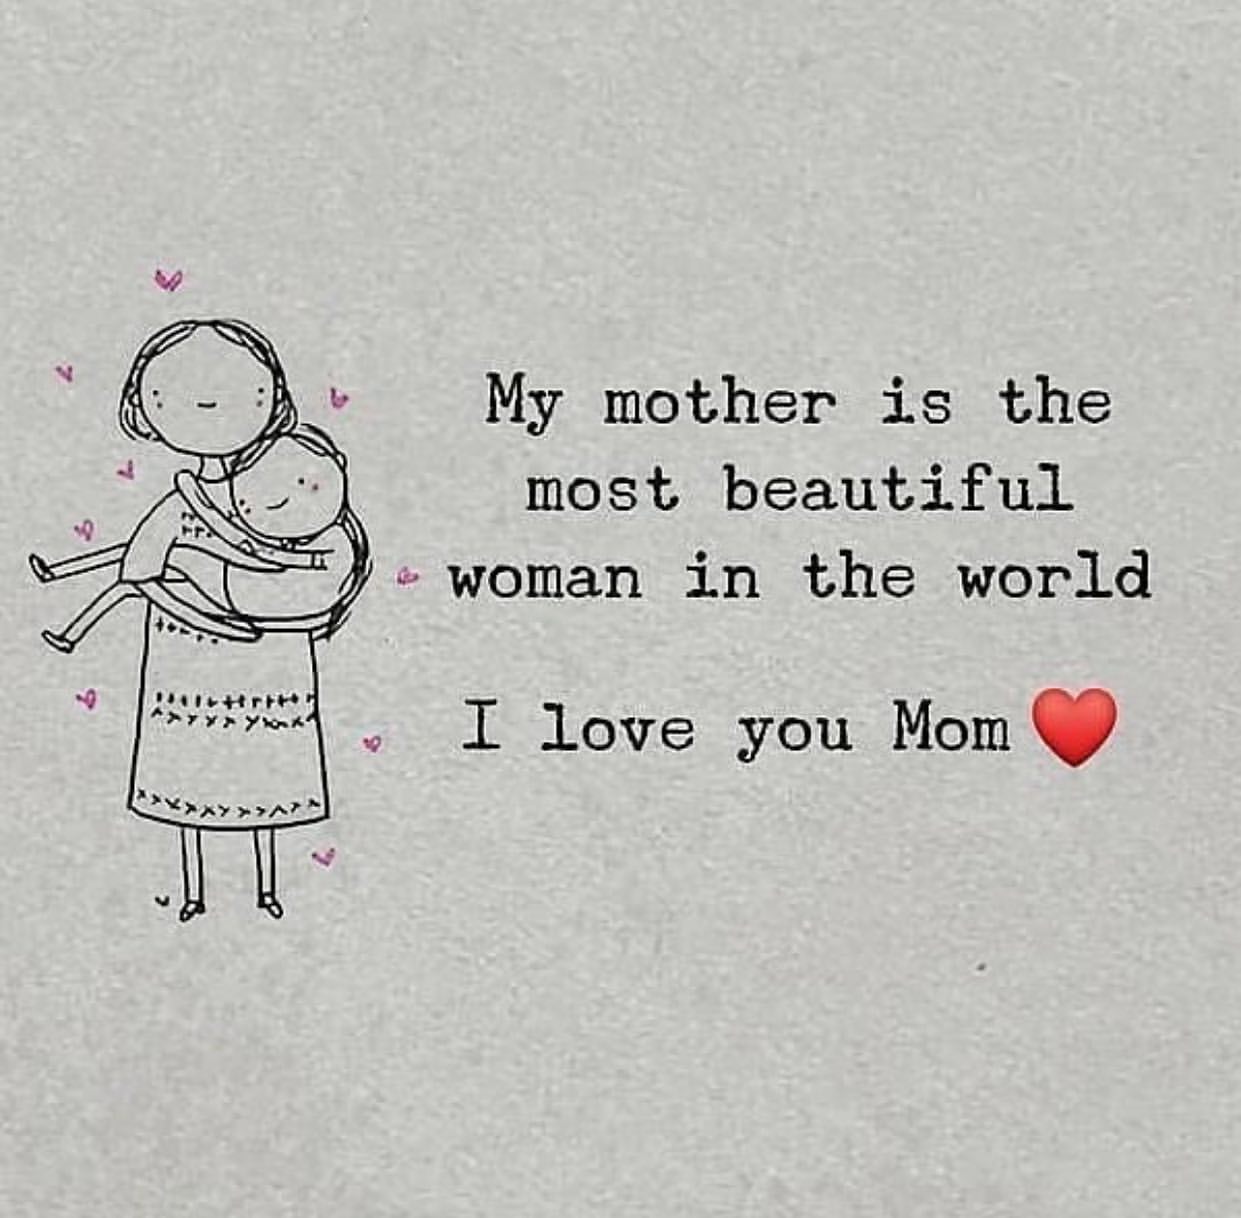 My mother is the most beautiful woman in the world. I love you Mom.